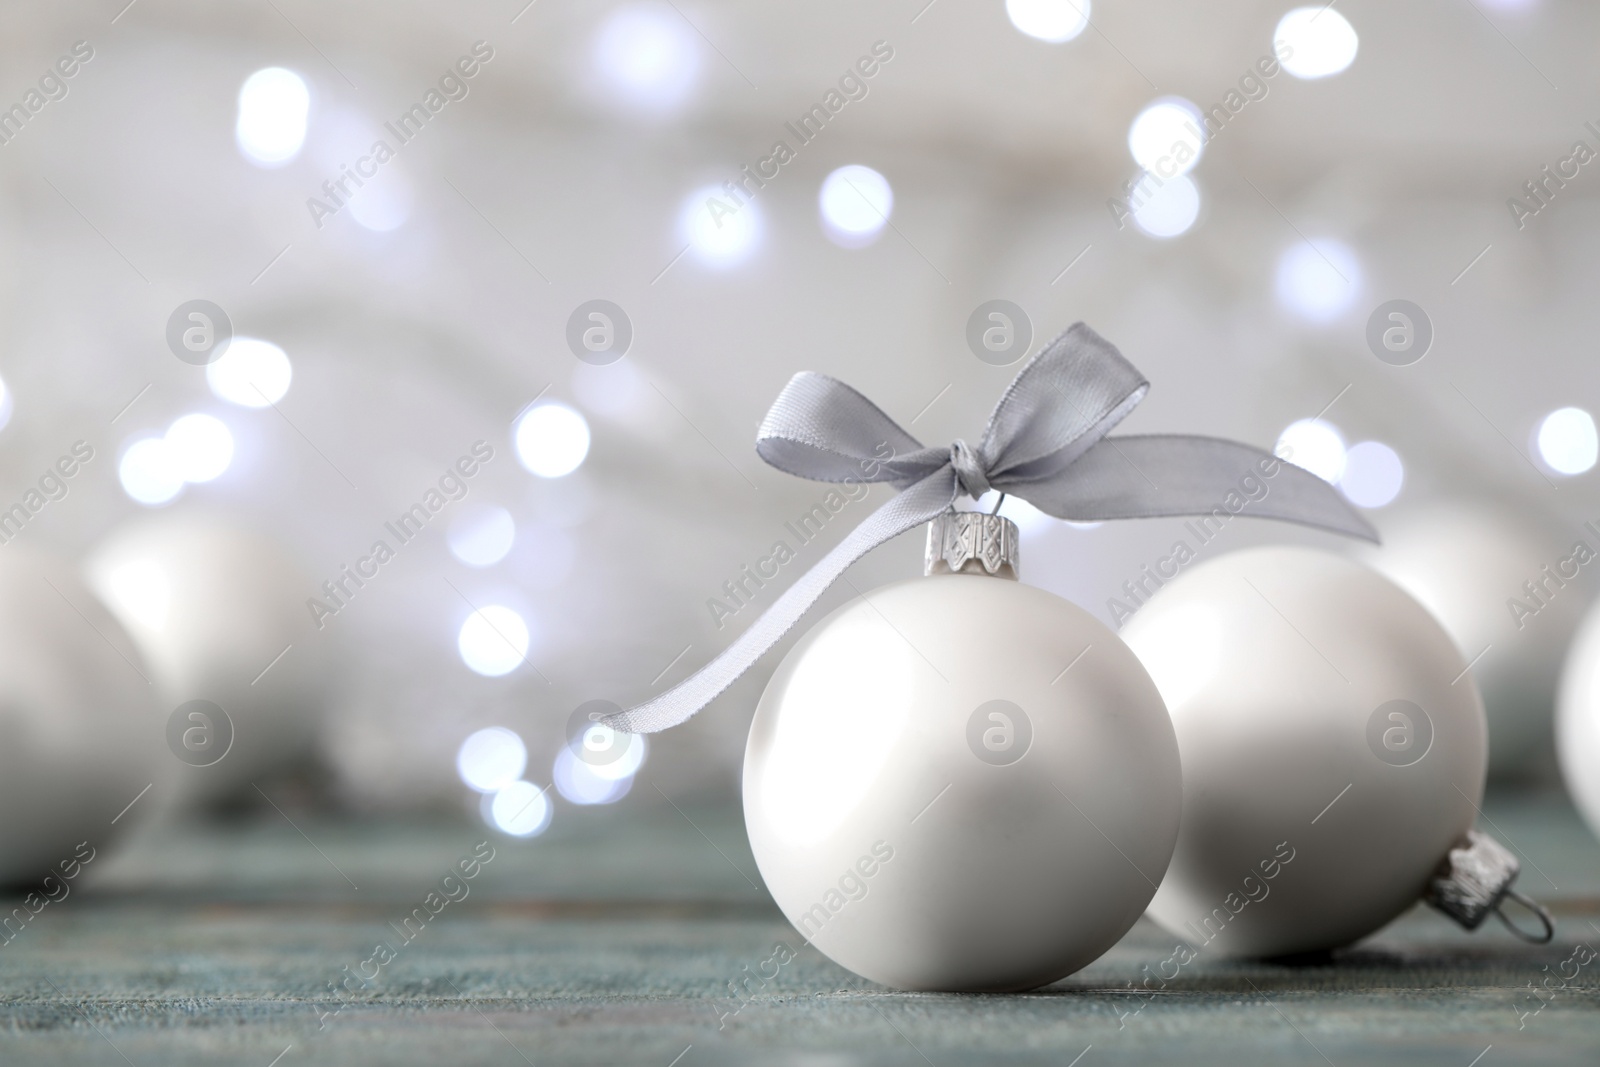 Photo of Beautiful Christmas balls on table against blurred festive lights. Space for text